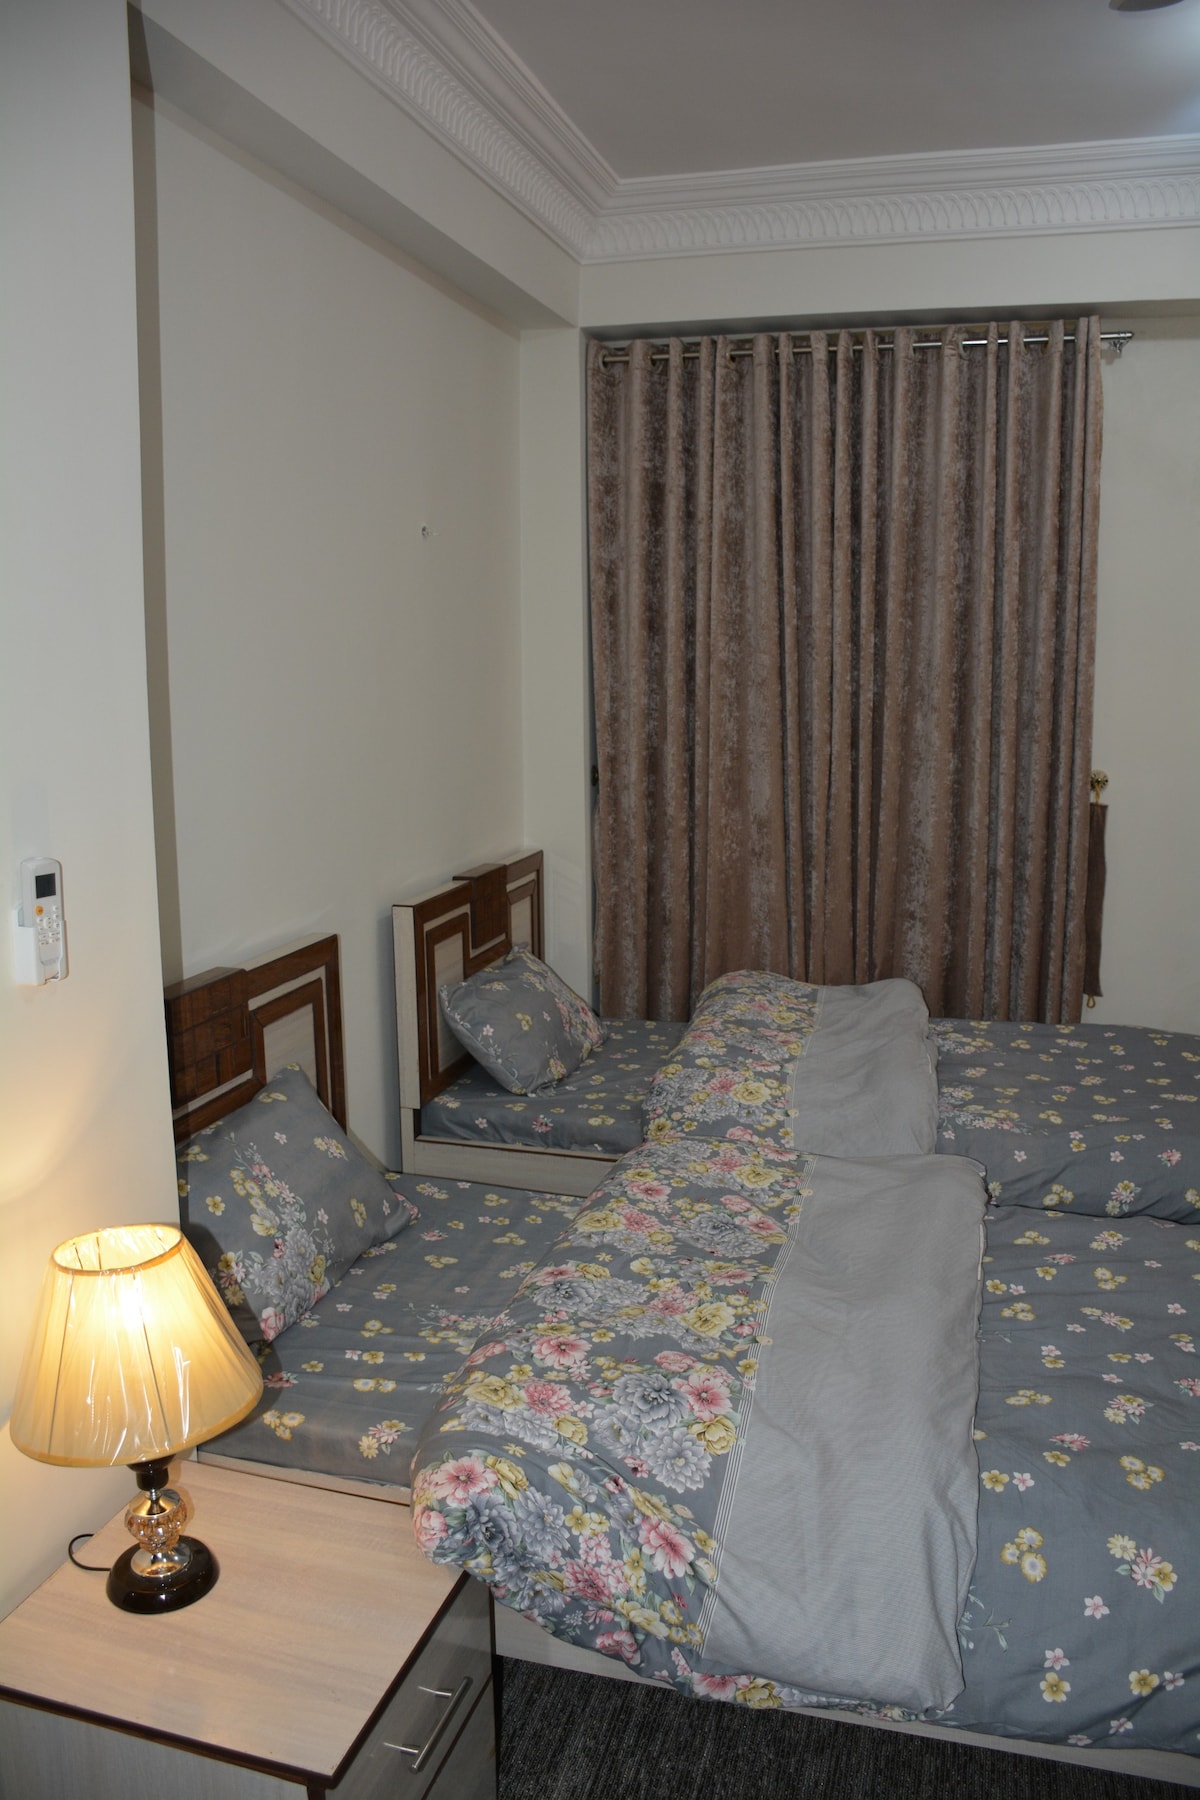 A Discounted furnished room in Swat